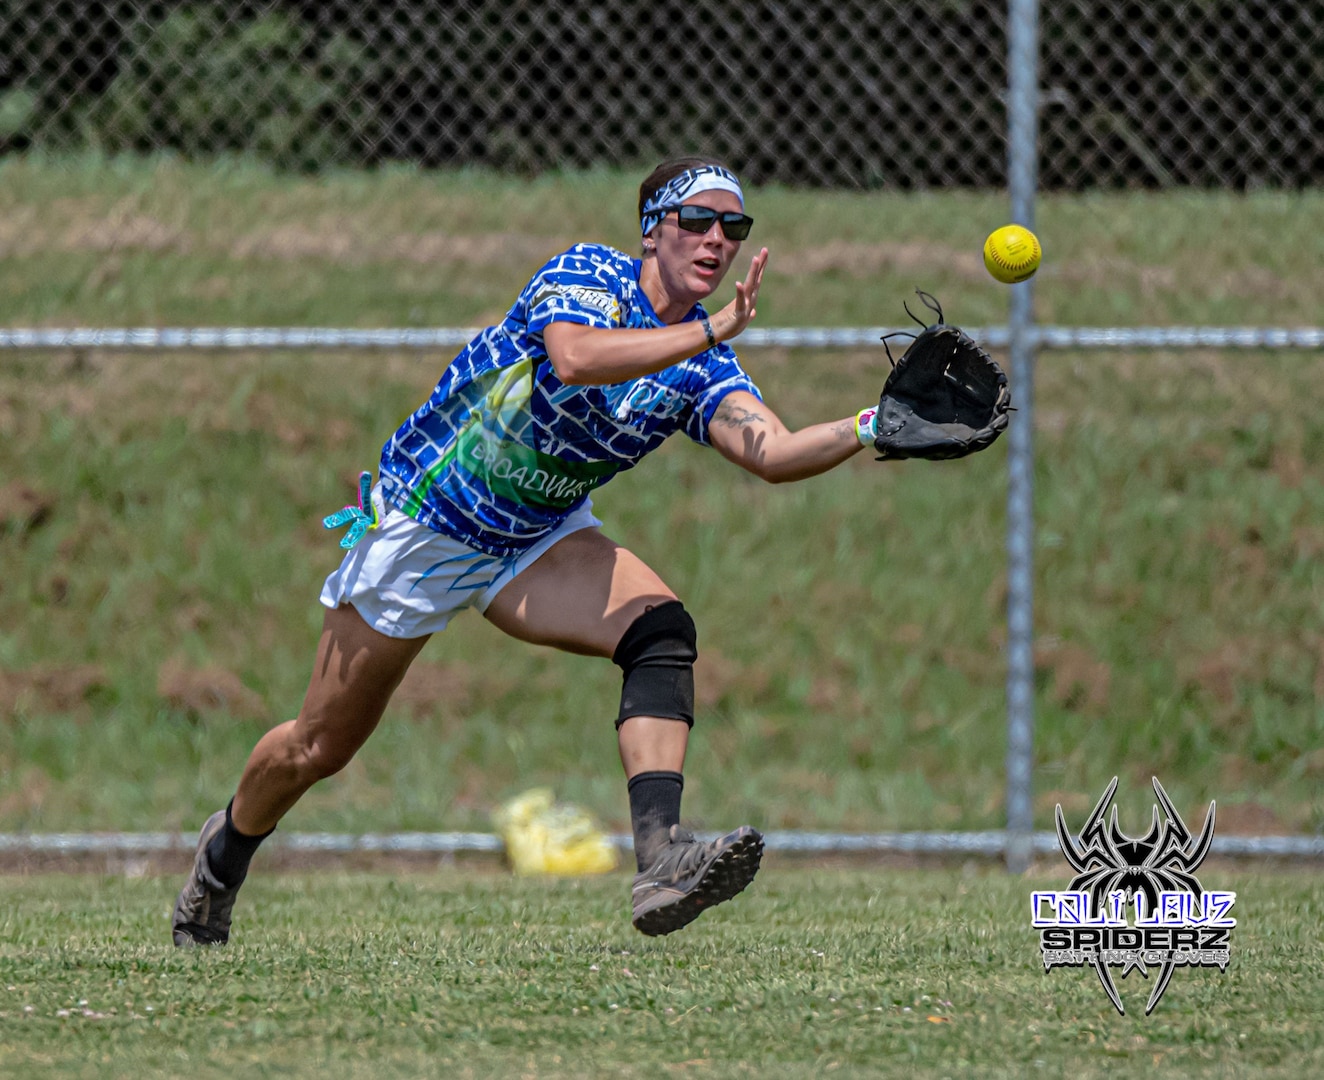 Illinois Army National Guard Sgt. 1st Class Mary Joan “MJ” Patten reaches for the ball during a slow pitch softball tournament in which she was participating. On July 18, Patten will report to Fort Sill, Oklahoma, to compete in the All-Army Women’s Softball training camp. (Photo by Cali Love Photography)